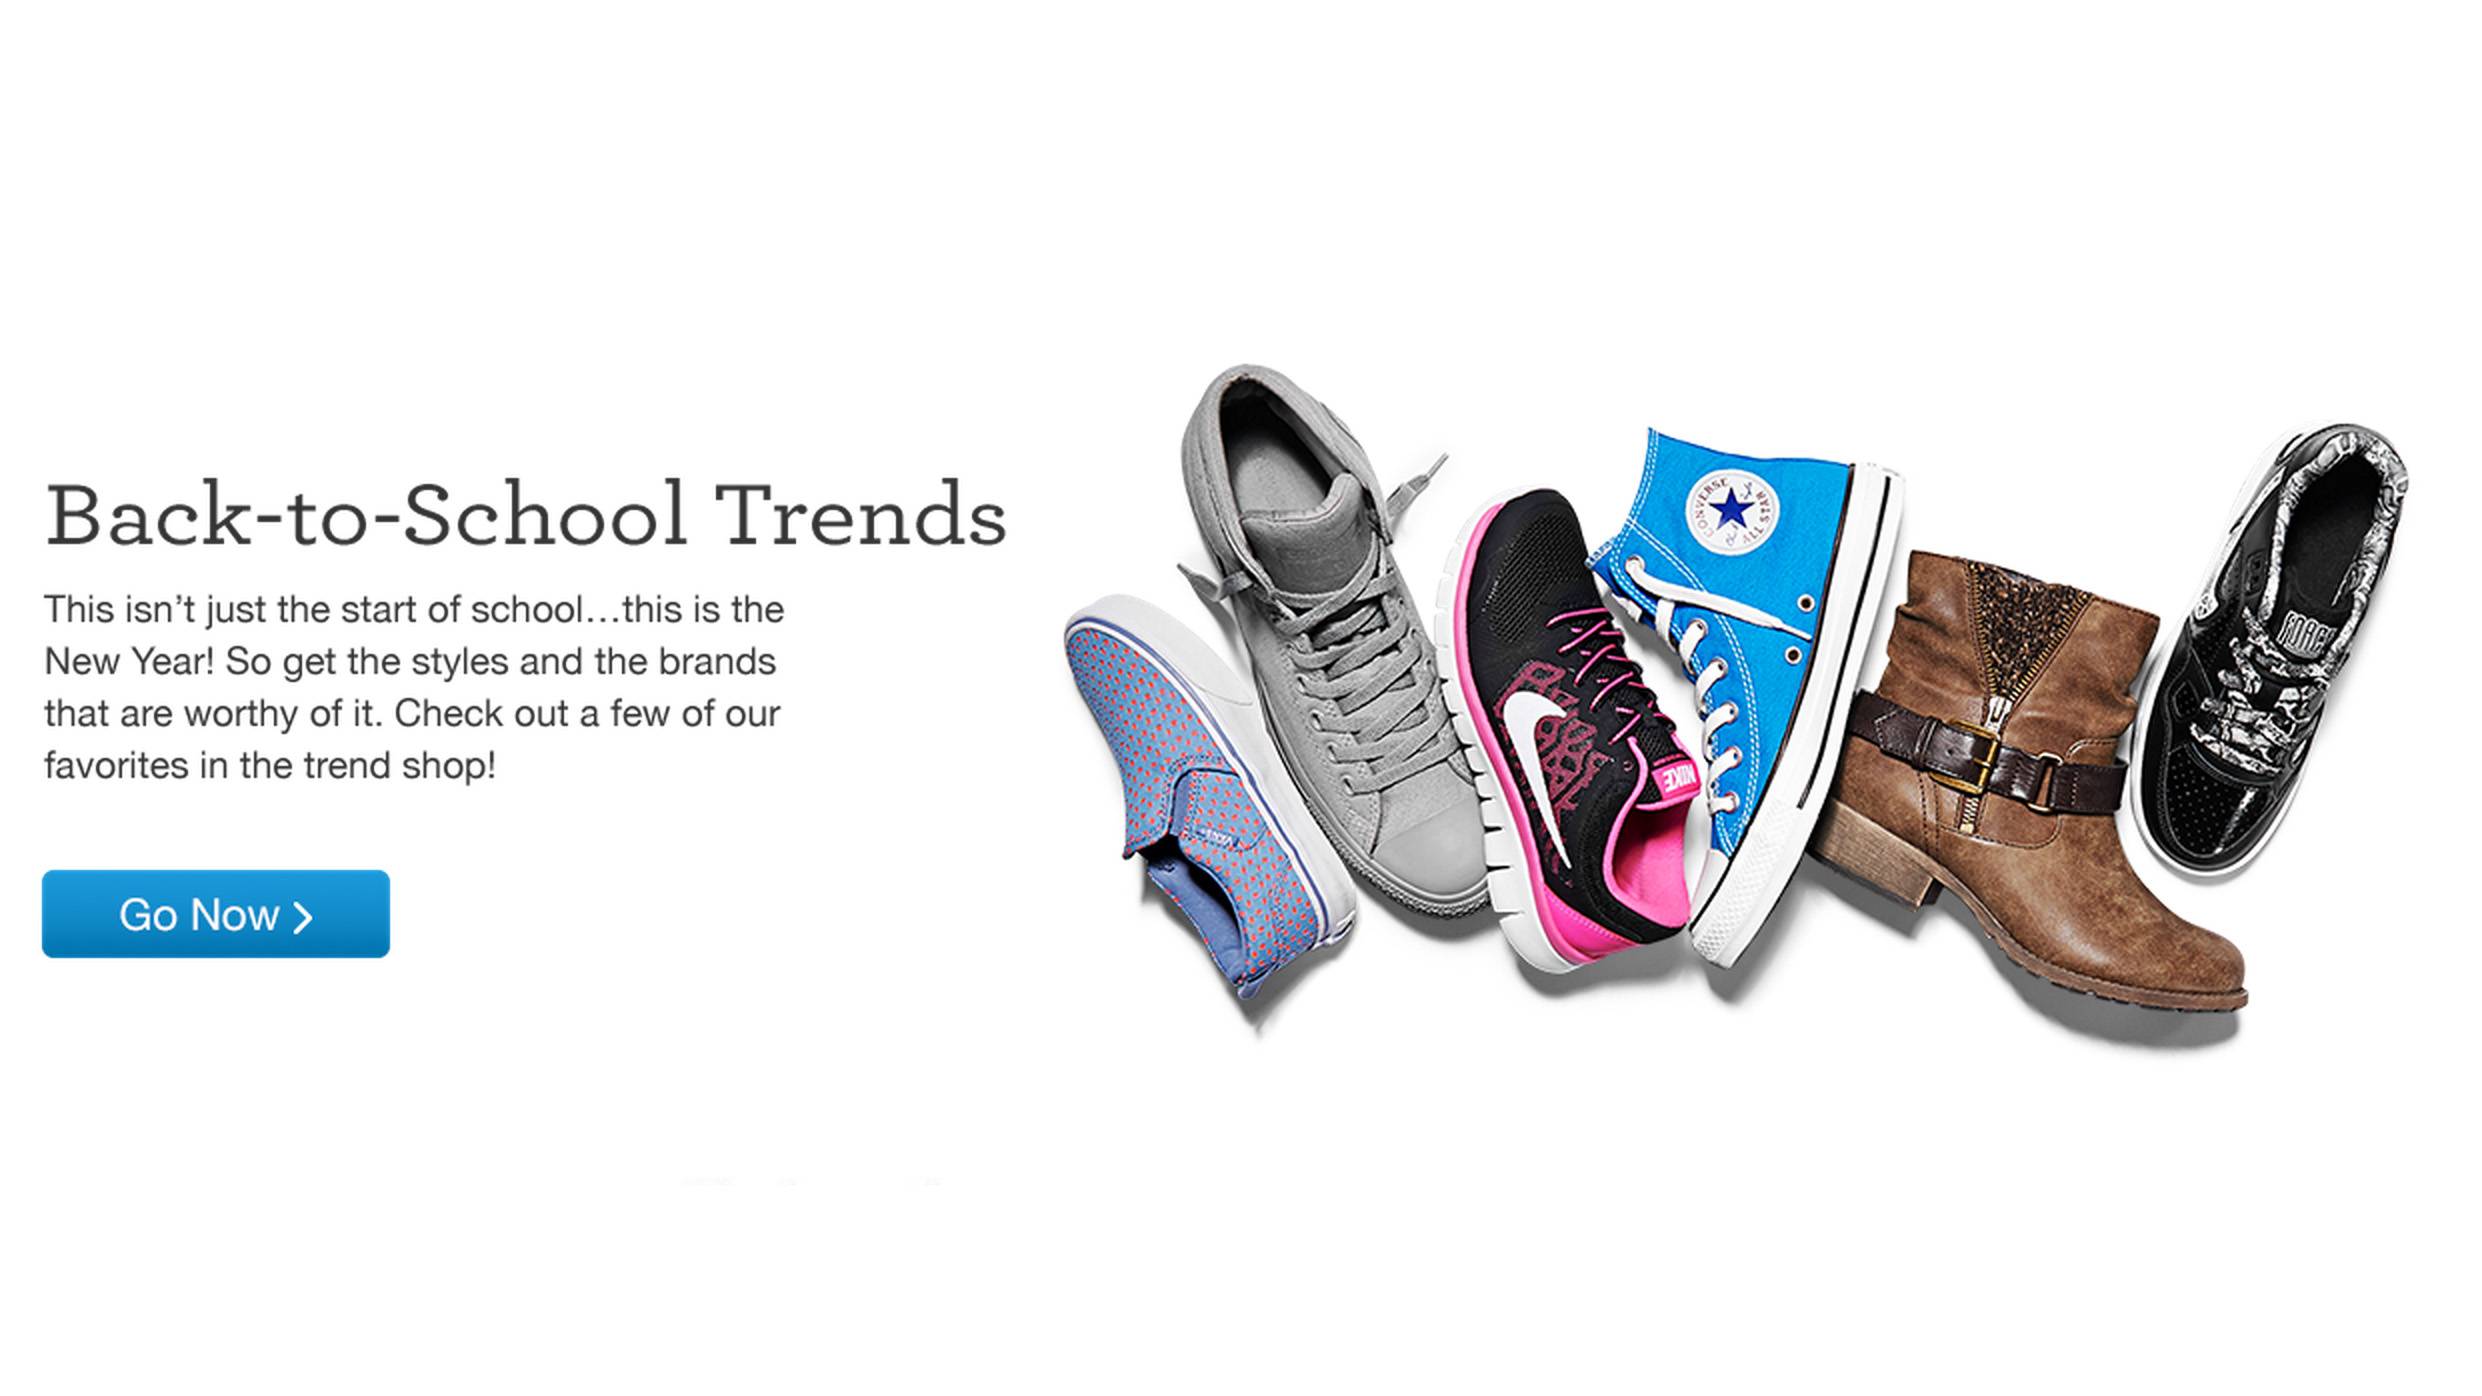 Famous Footwear - Back to school is such a special time for us